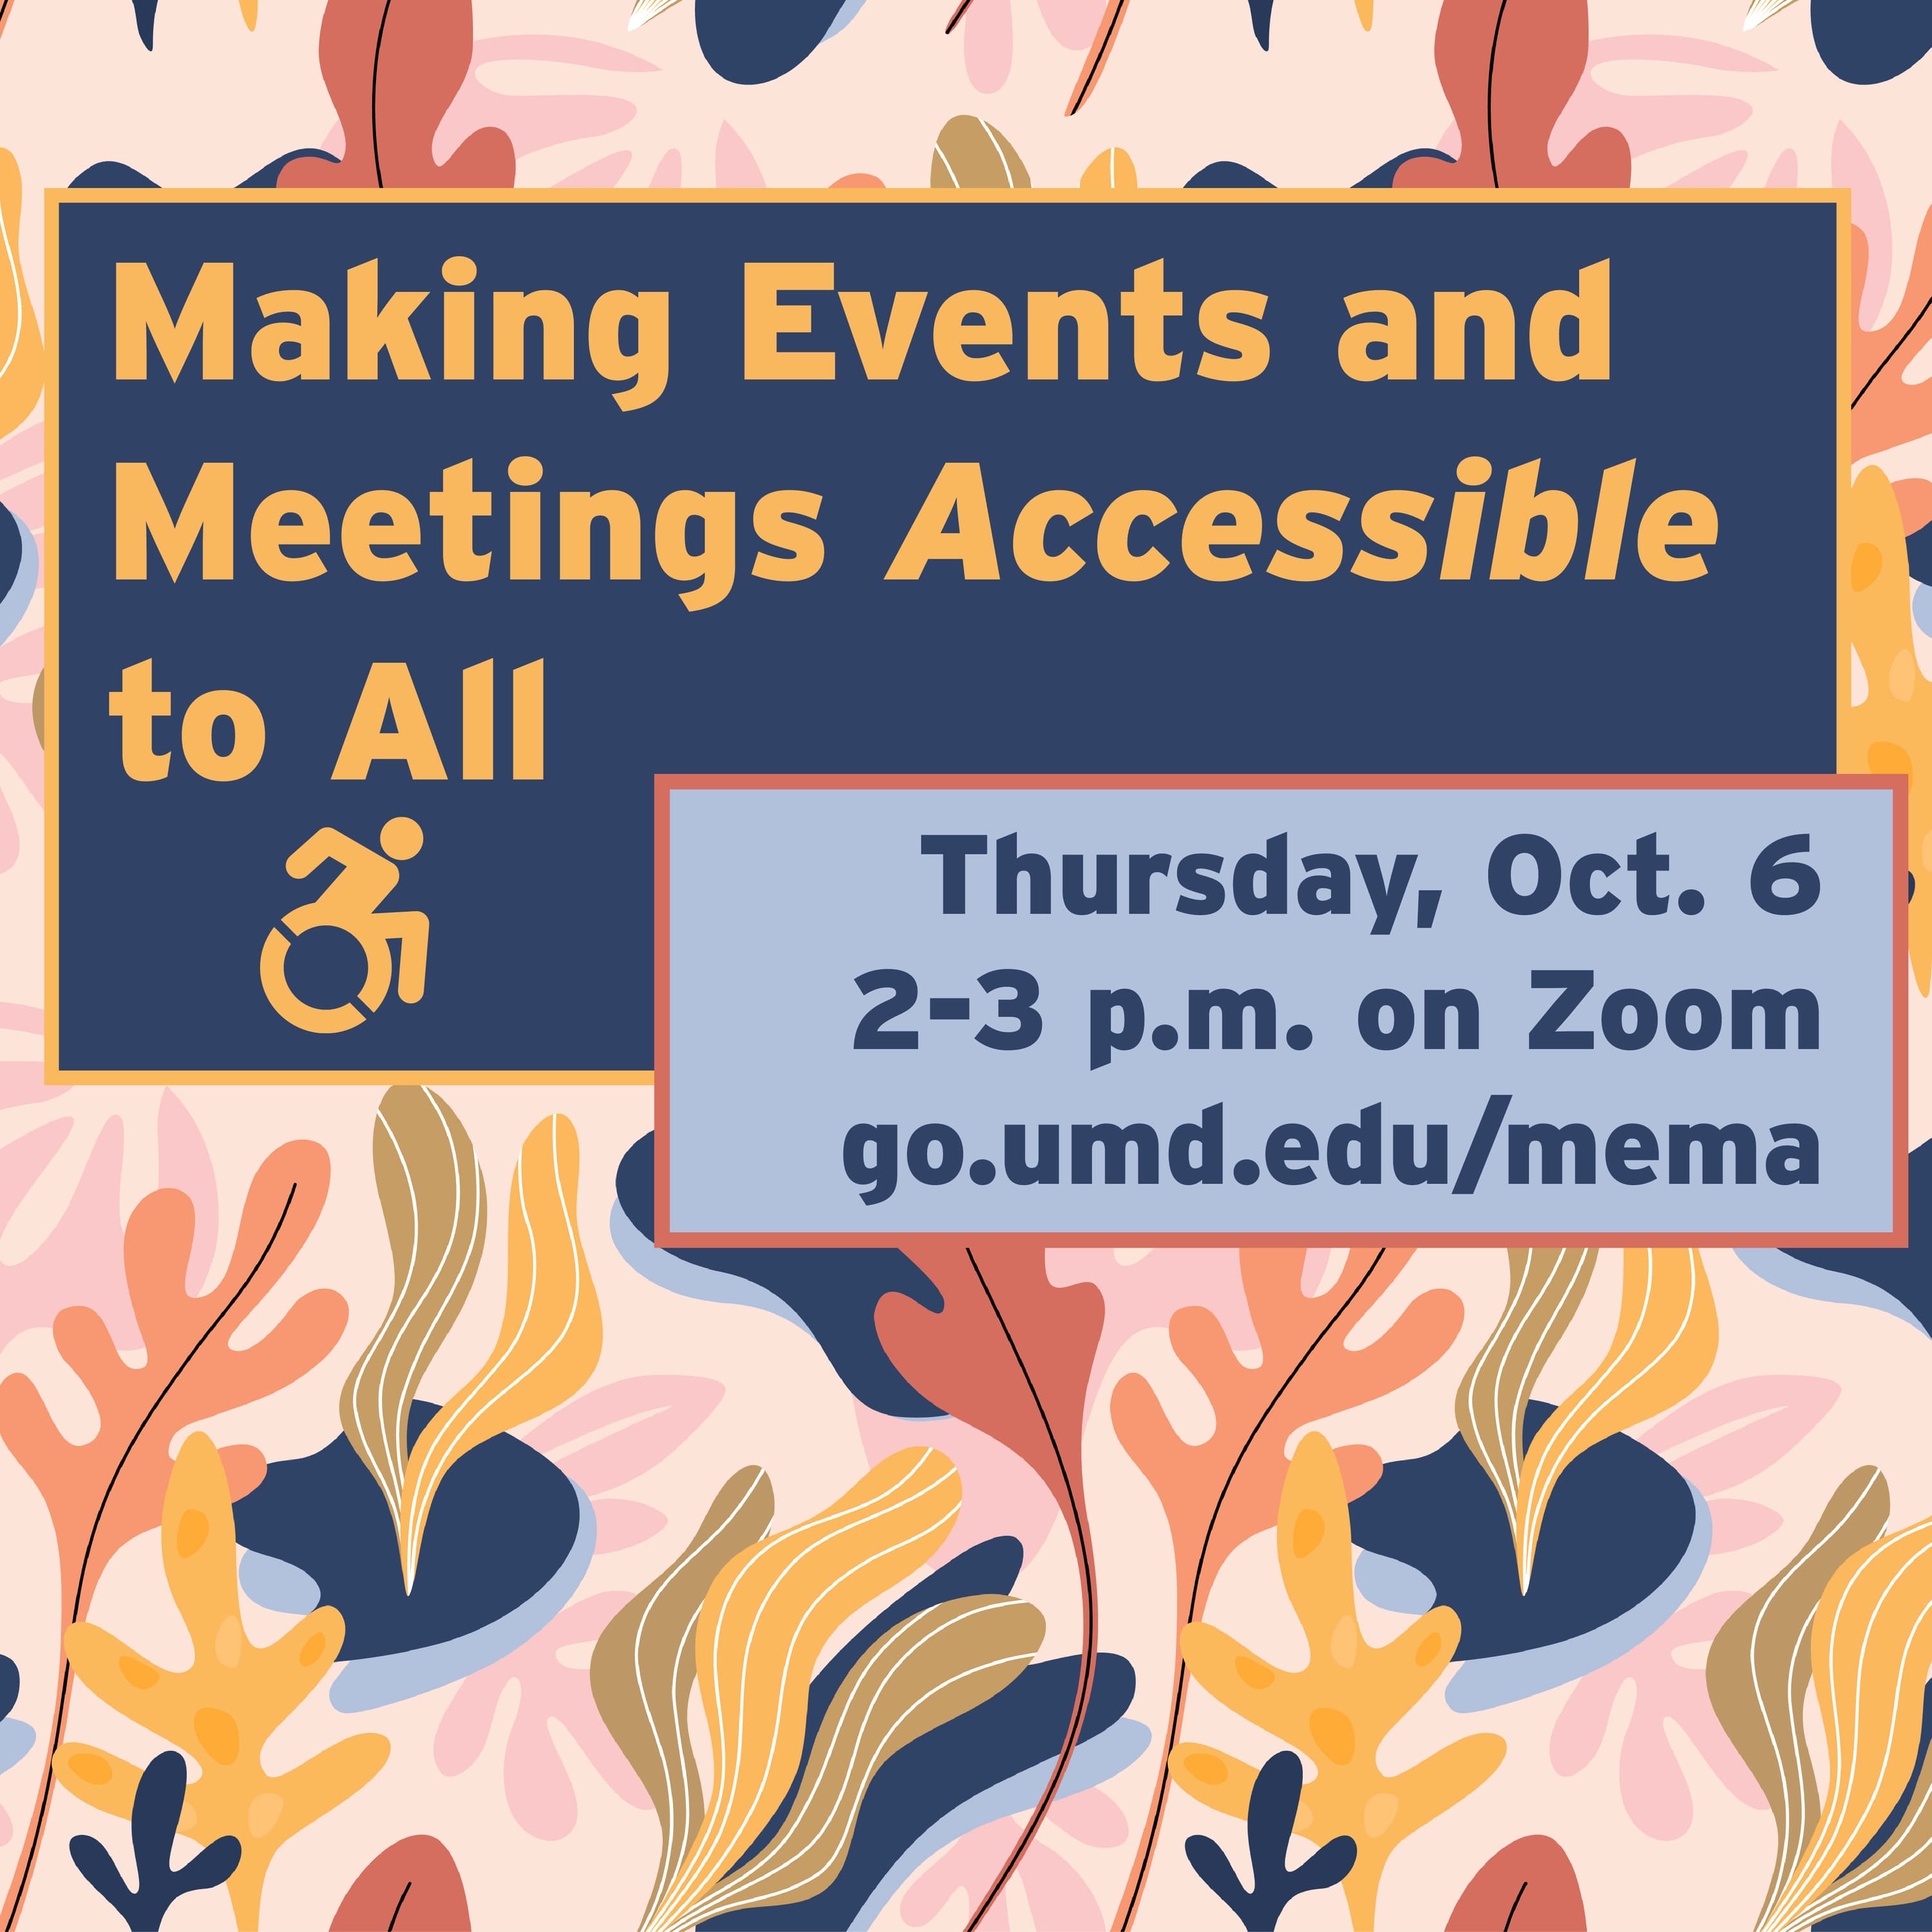 Flyer for Making Events and Meetings Accessible to All with a pink and yellow plant background and a wheelchair person icon